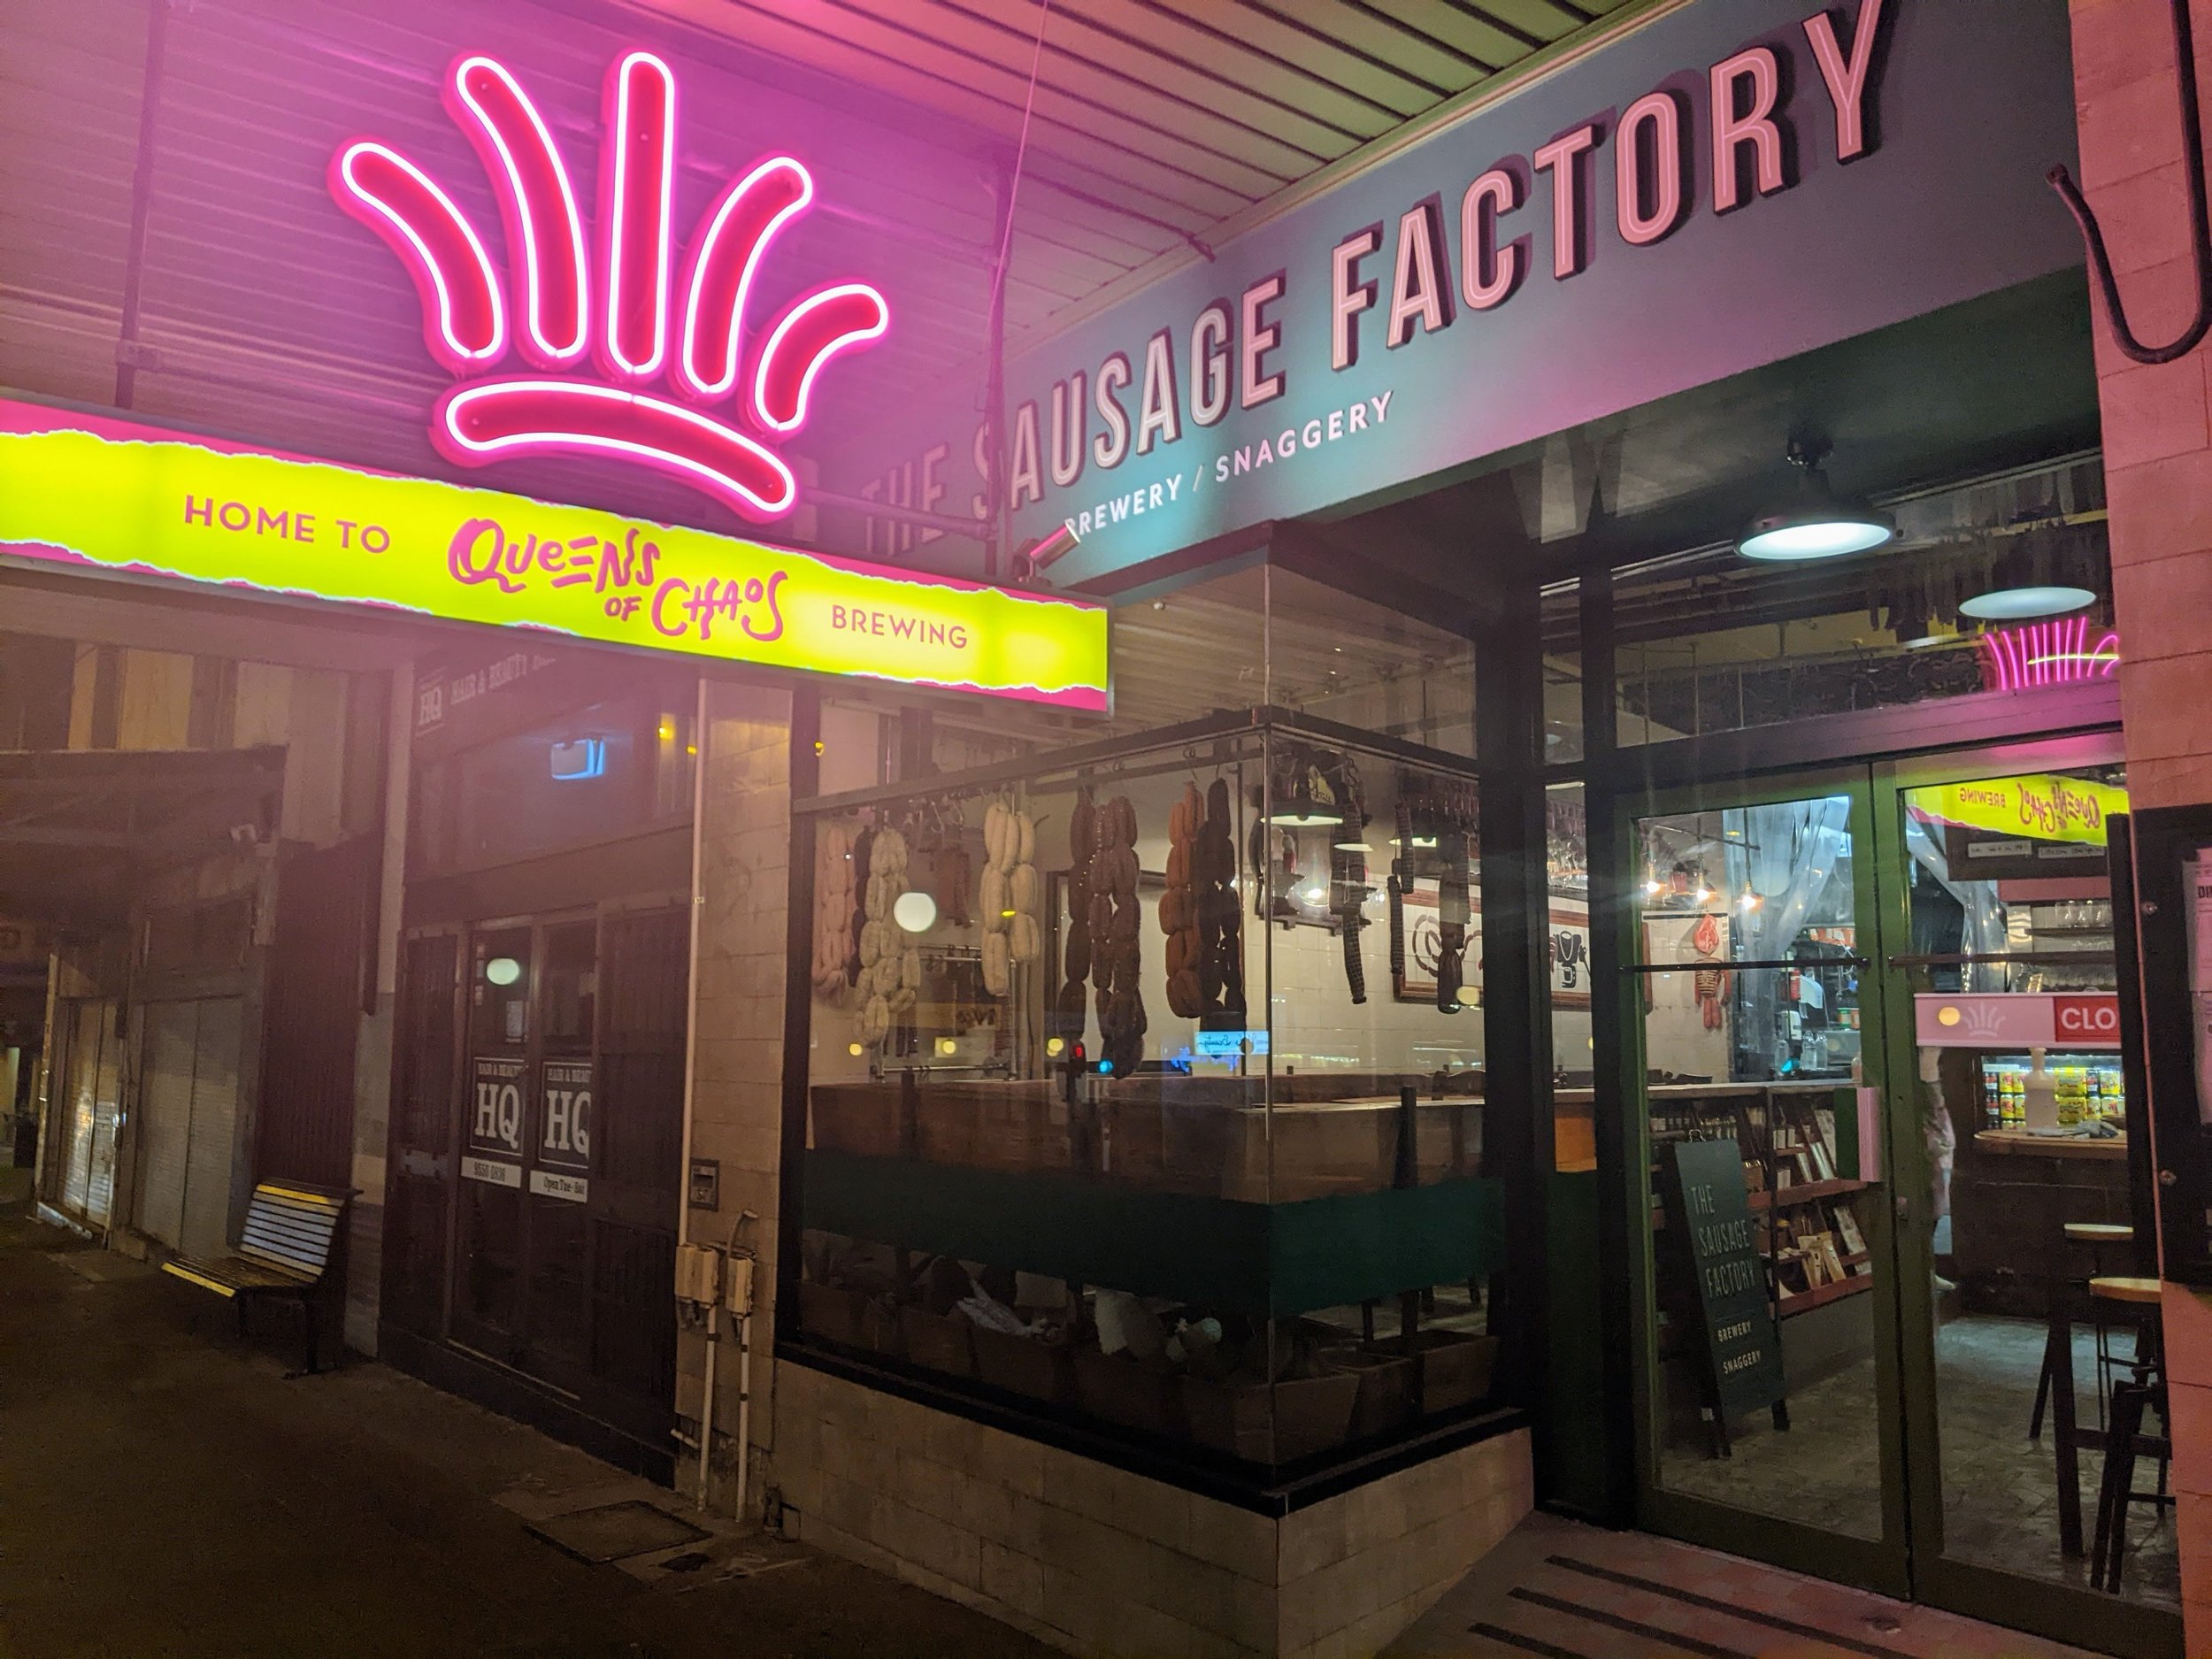 Local Business Review – The Sausage Factory/Queens of Chaos